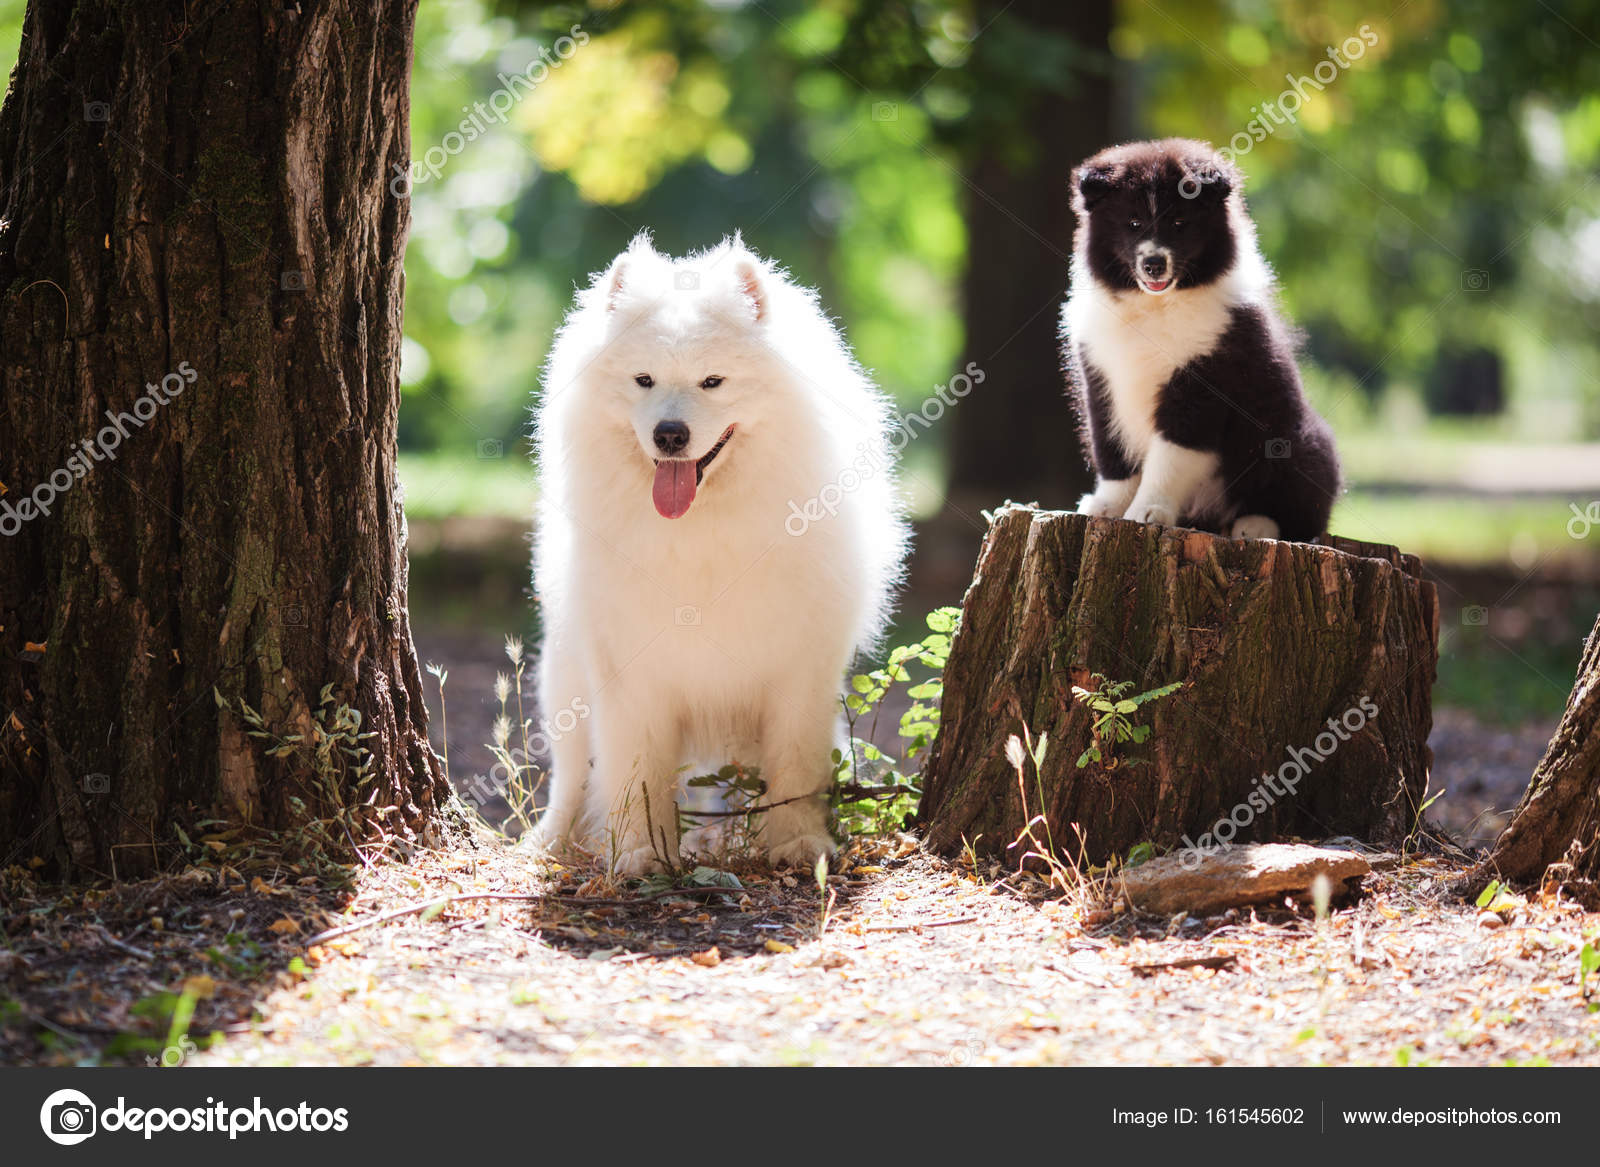 Big Fluffy White Dog With A Black And White Puppy Stock Photo C Tatyanabelka 161545602